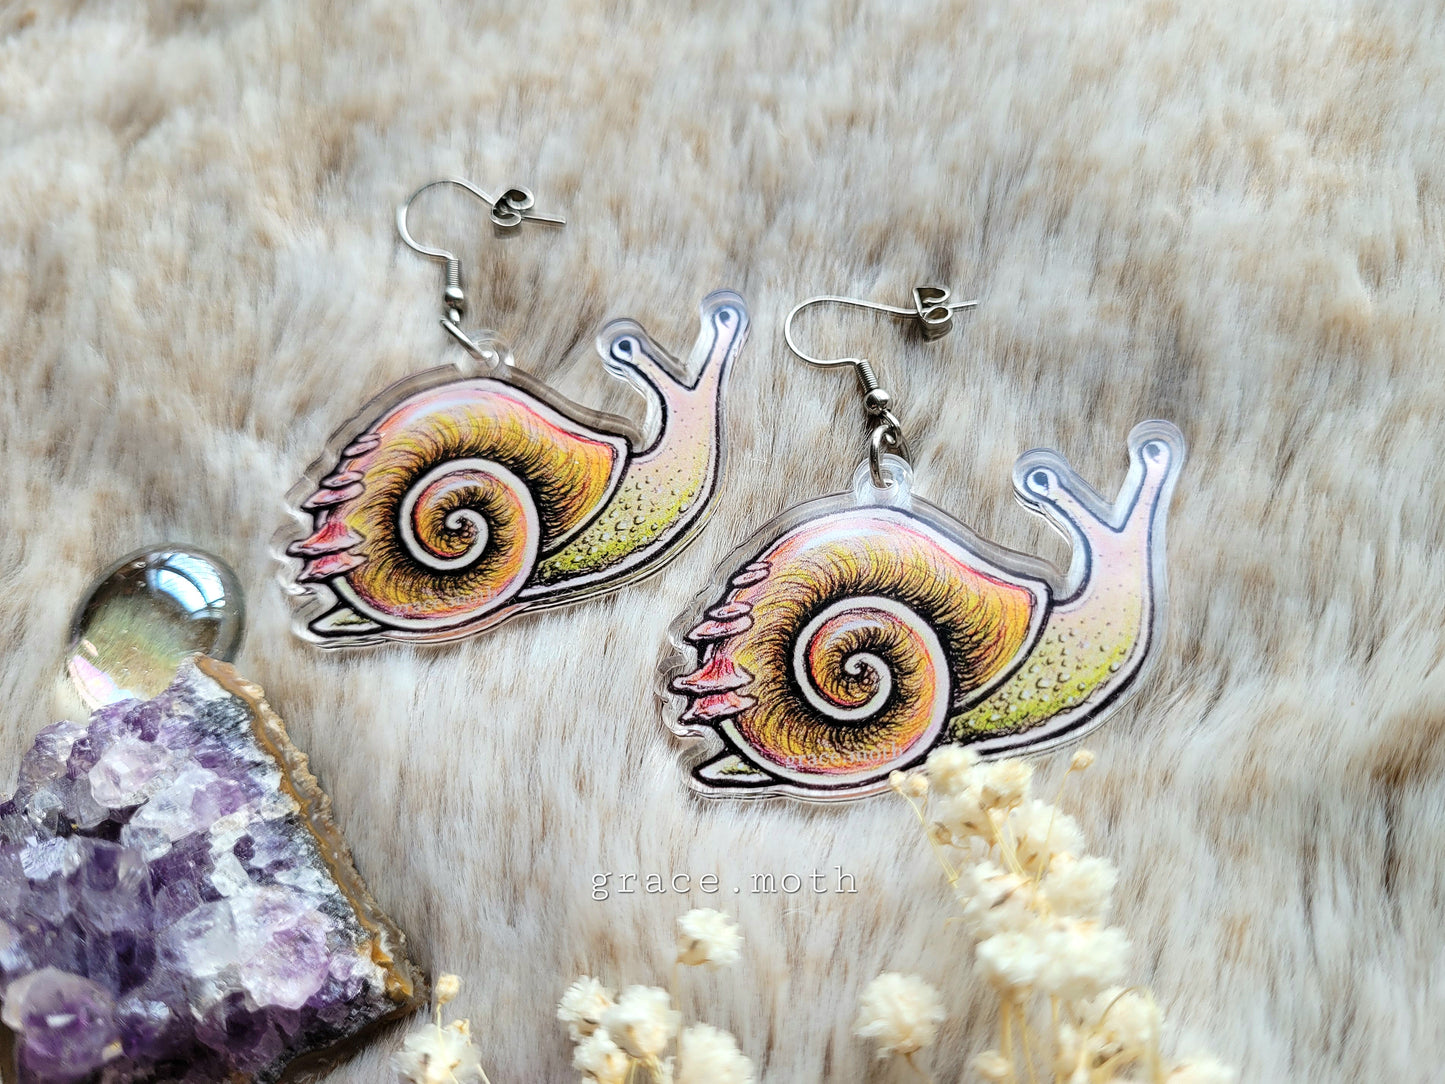 Cute Snail illustrated earrings, recycled acrylic and 304 hypoallergenic stainless steel hooks, by Grace Moth